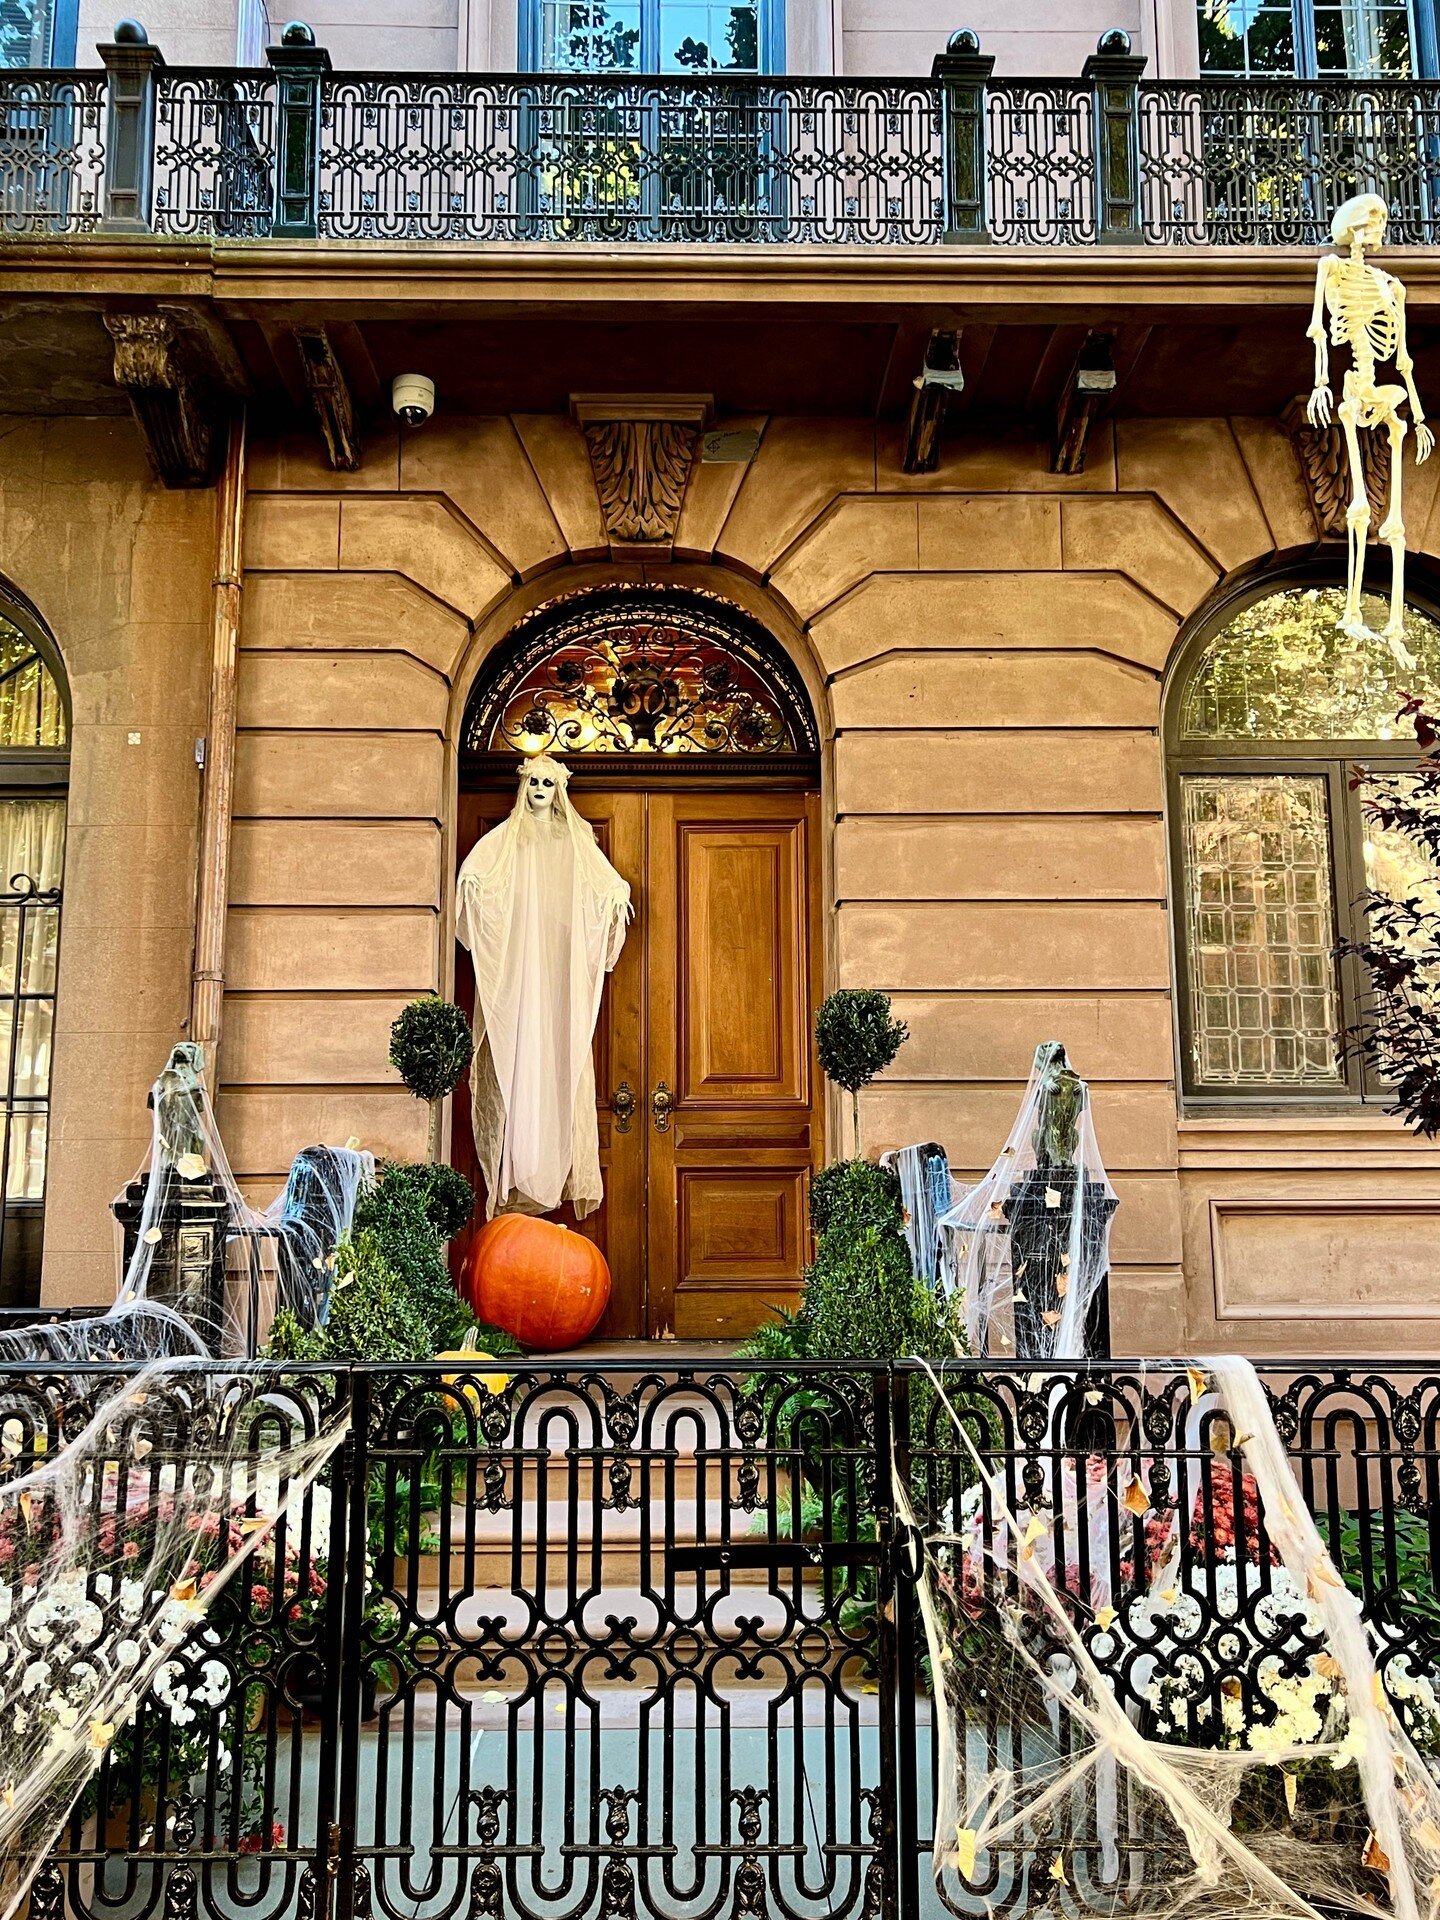 Happy Halloween!
👻
🎃
🗝
💀
🏙
#westvillage #thevillage #halloween #spookyseason #luxury #luxuryapartments #manhattan #nyc #wsp #nycapartments #nycbroker #listing #selling #buying #househunting #curbappeal #manhattan #buyers #autumn #renters #seller